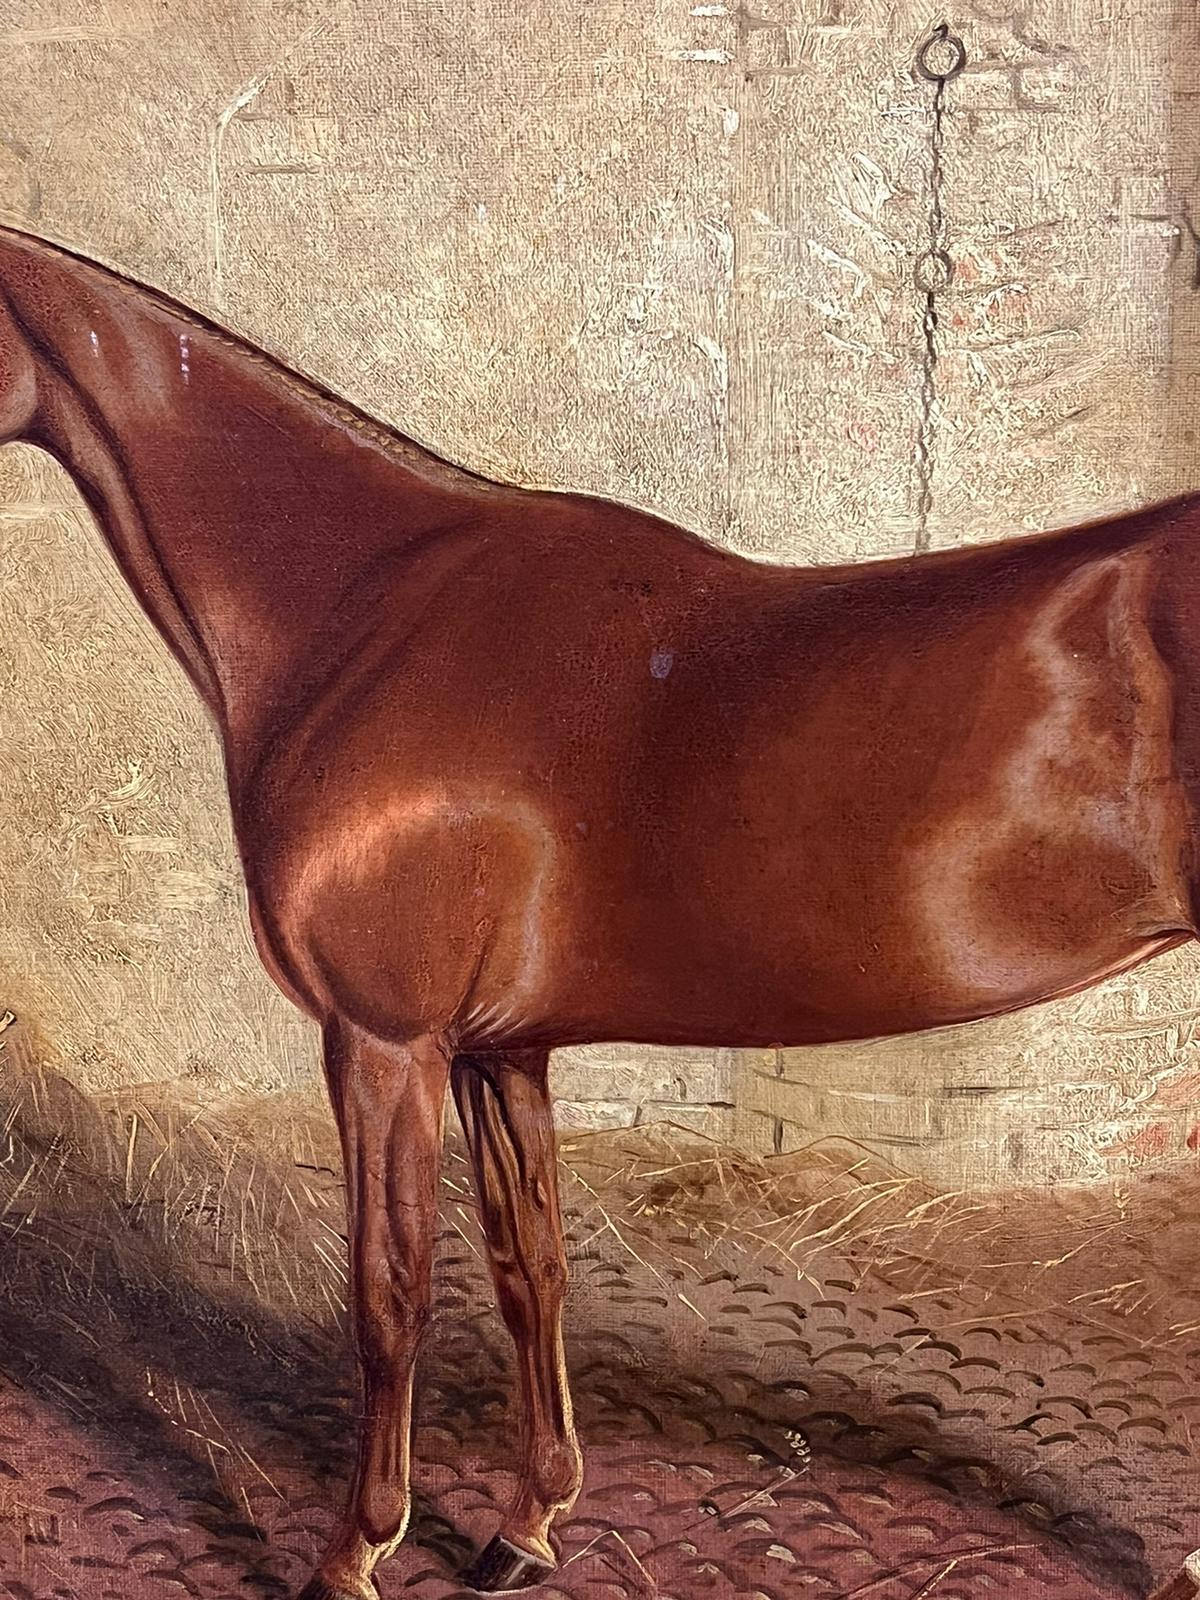 Fine 19th Century British Sporting Art Oil Painting Horse in Stable Interior For Sale 2